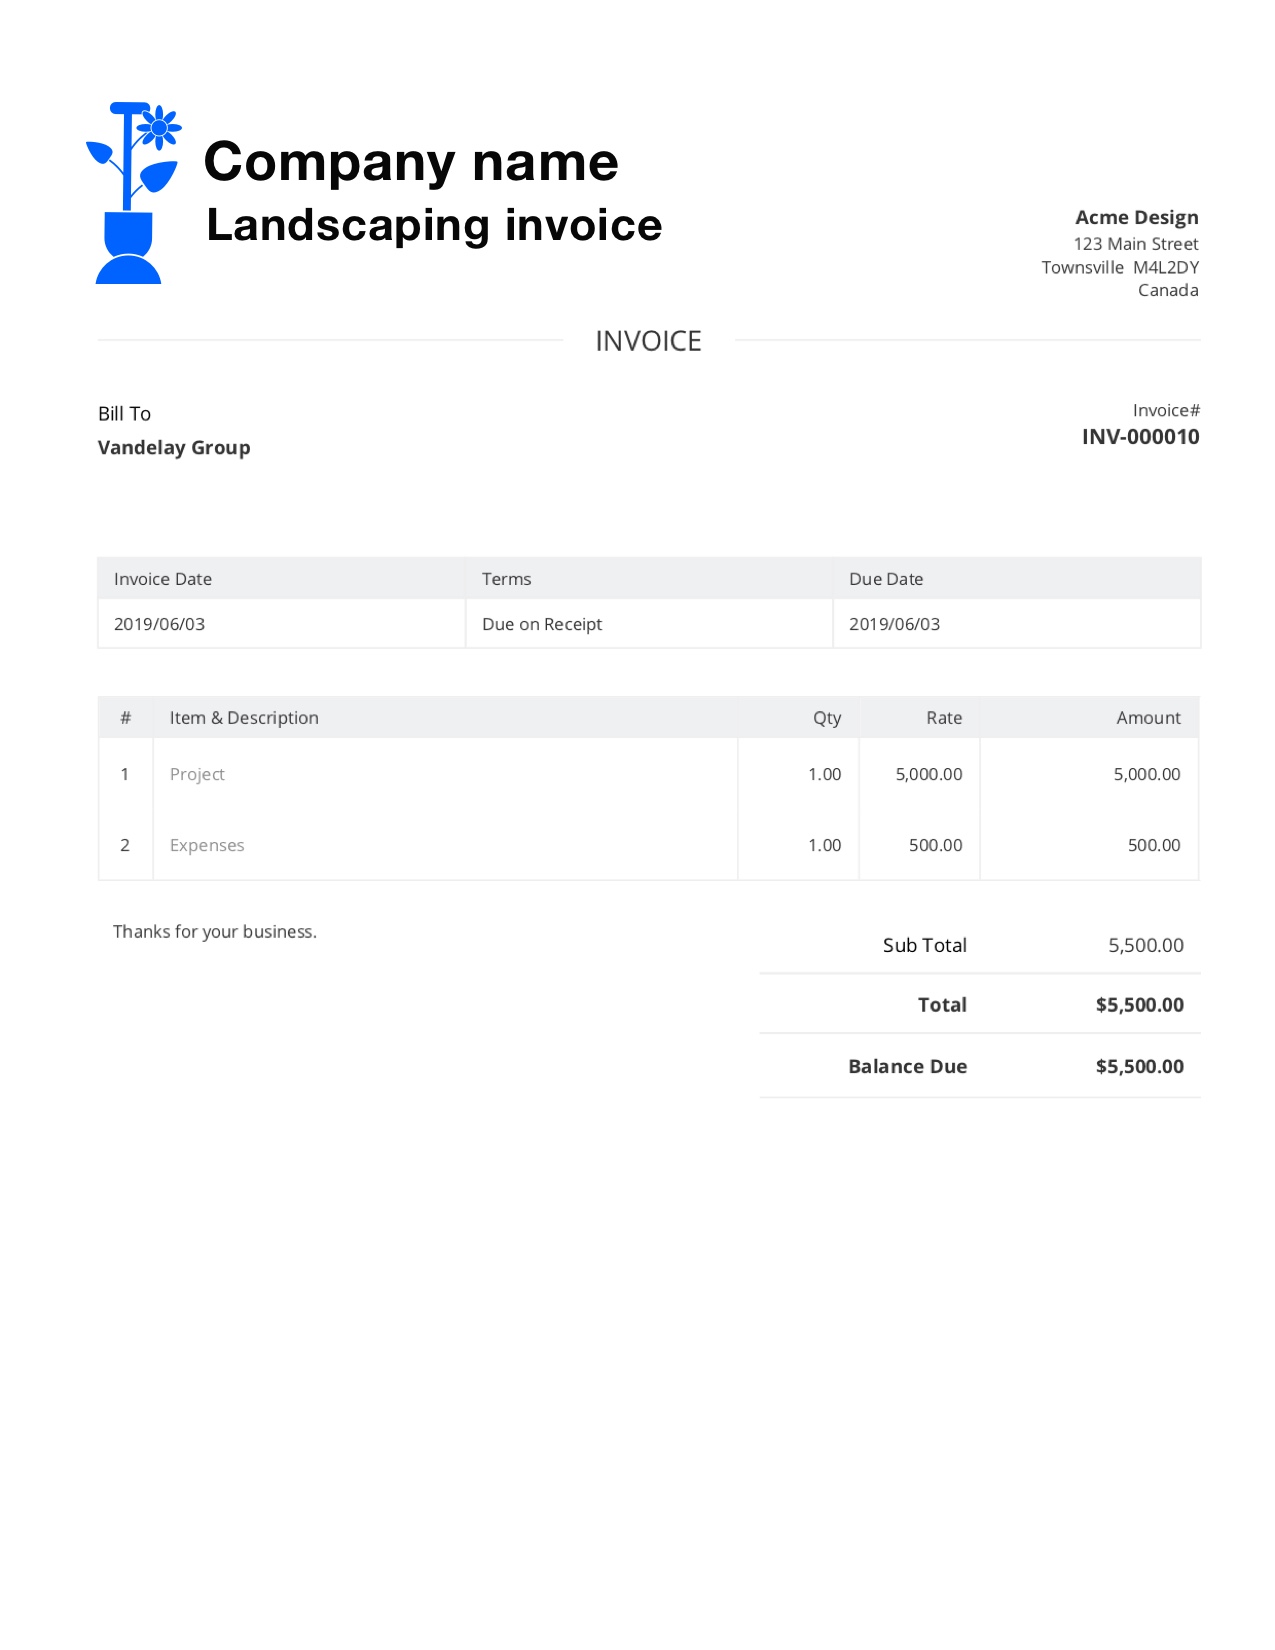 free-landscaping-invoice-template-customize-and-send-in-90-seconds